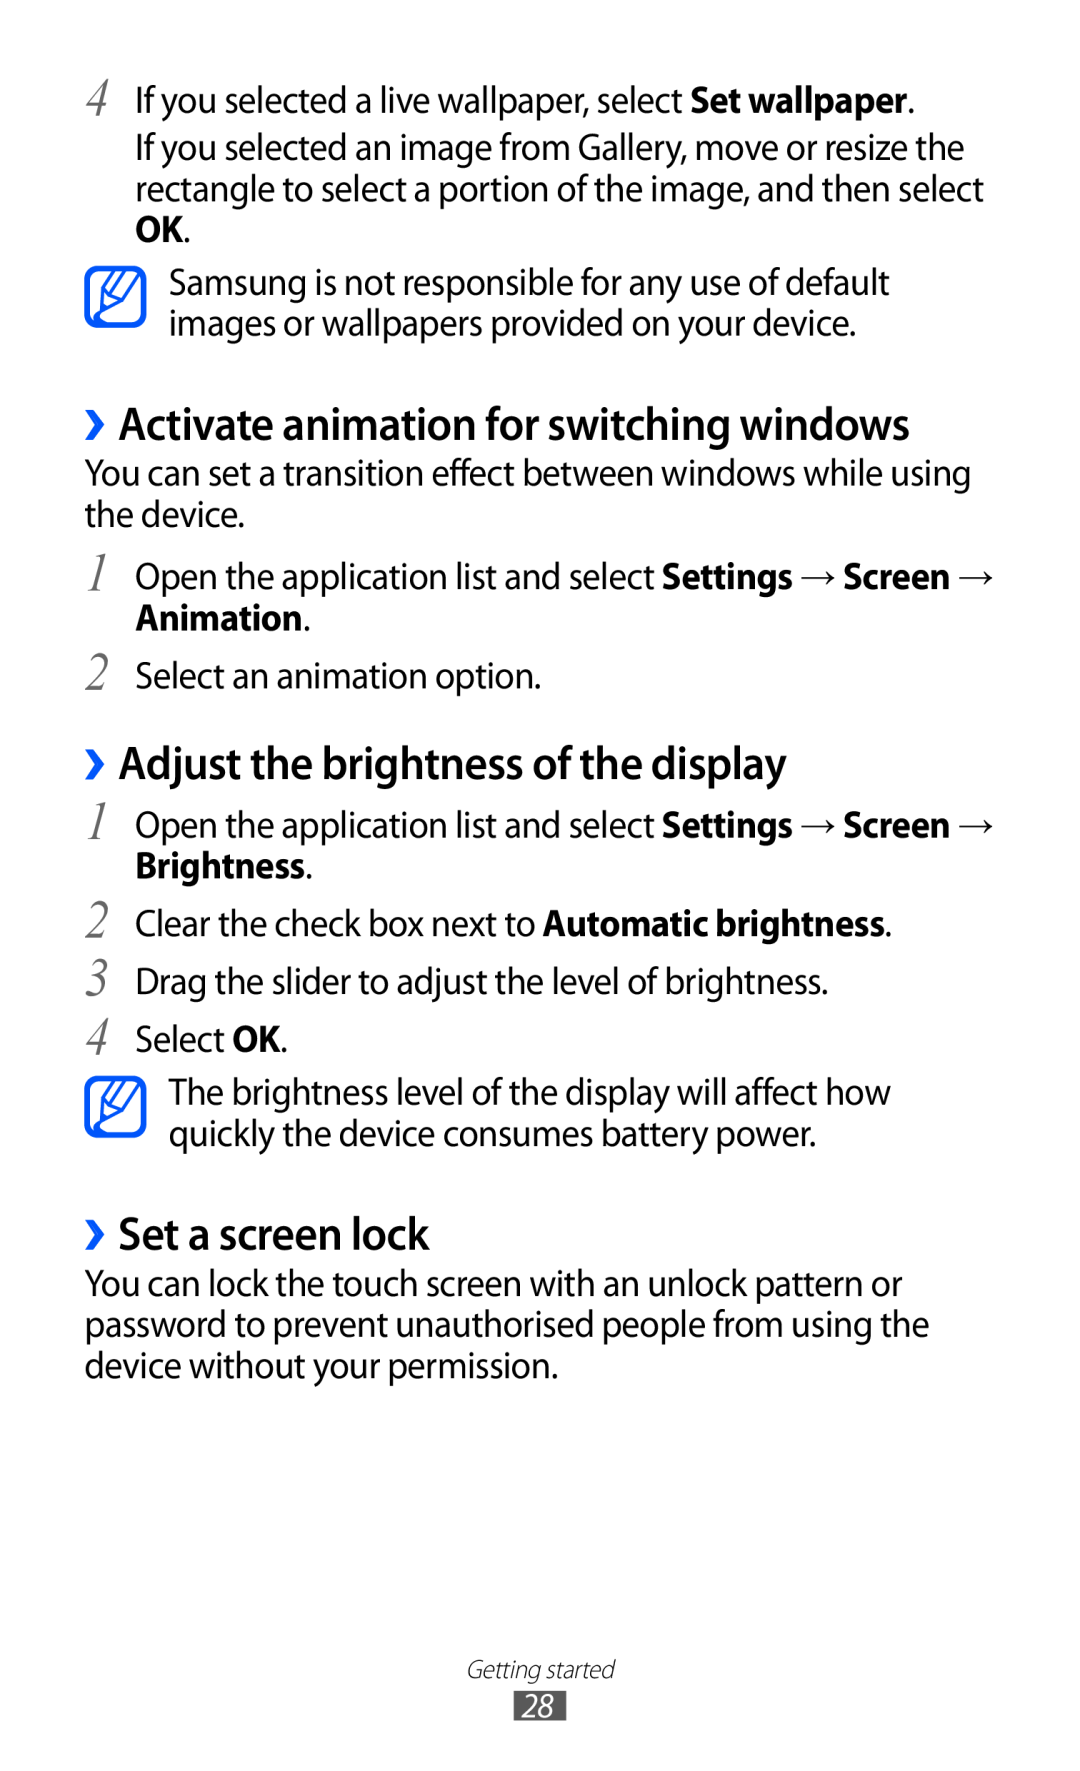 Samsung GT-P7320UWACOV, GT-P7320UWAVD2 ››Activate animation for switching windows, ››Adjust the brightness of the display 